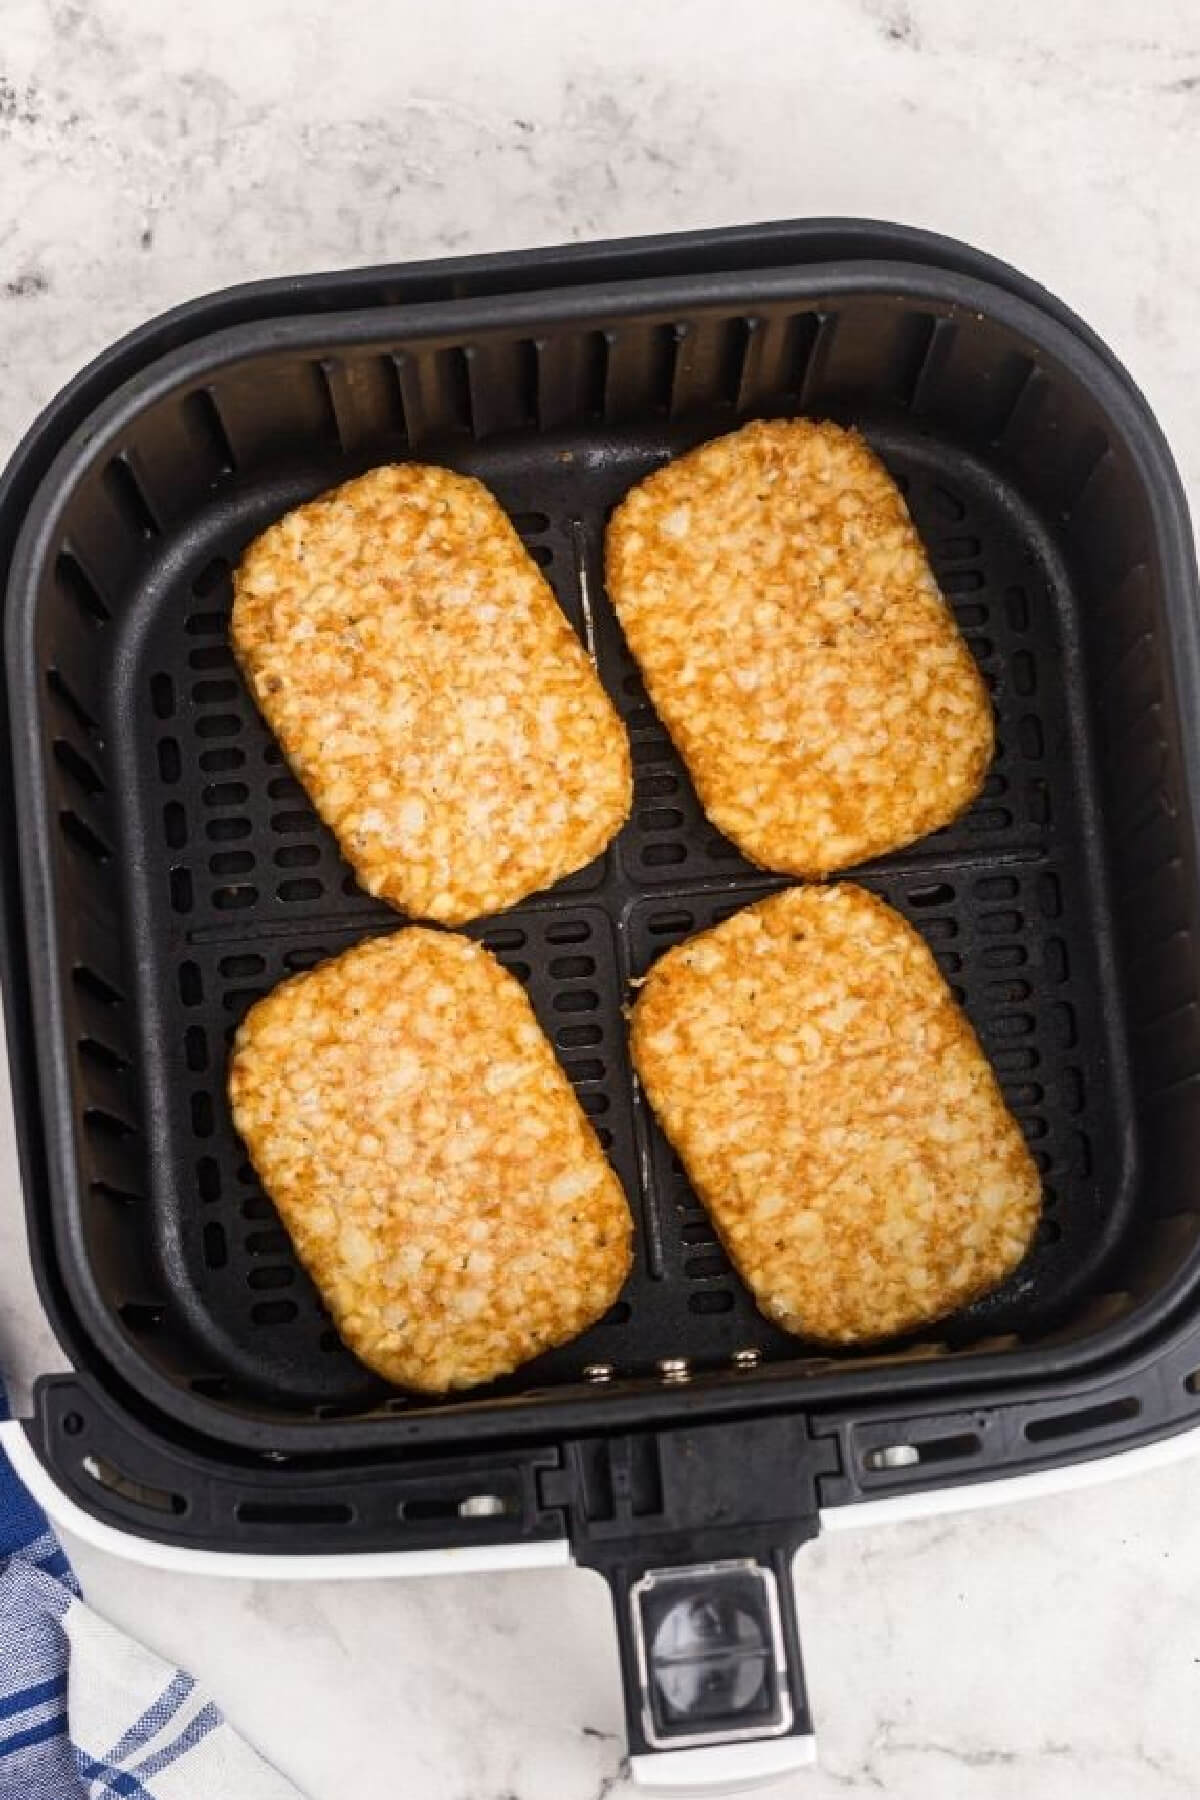 Frozen hash browns in air fryer basket ready to cook. 